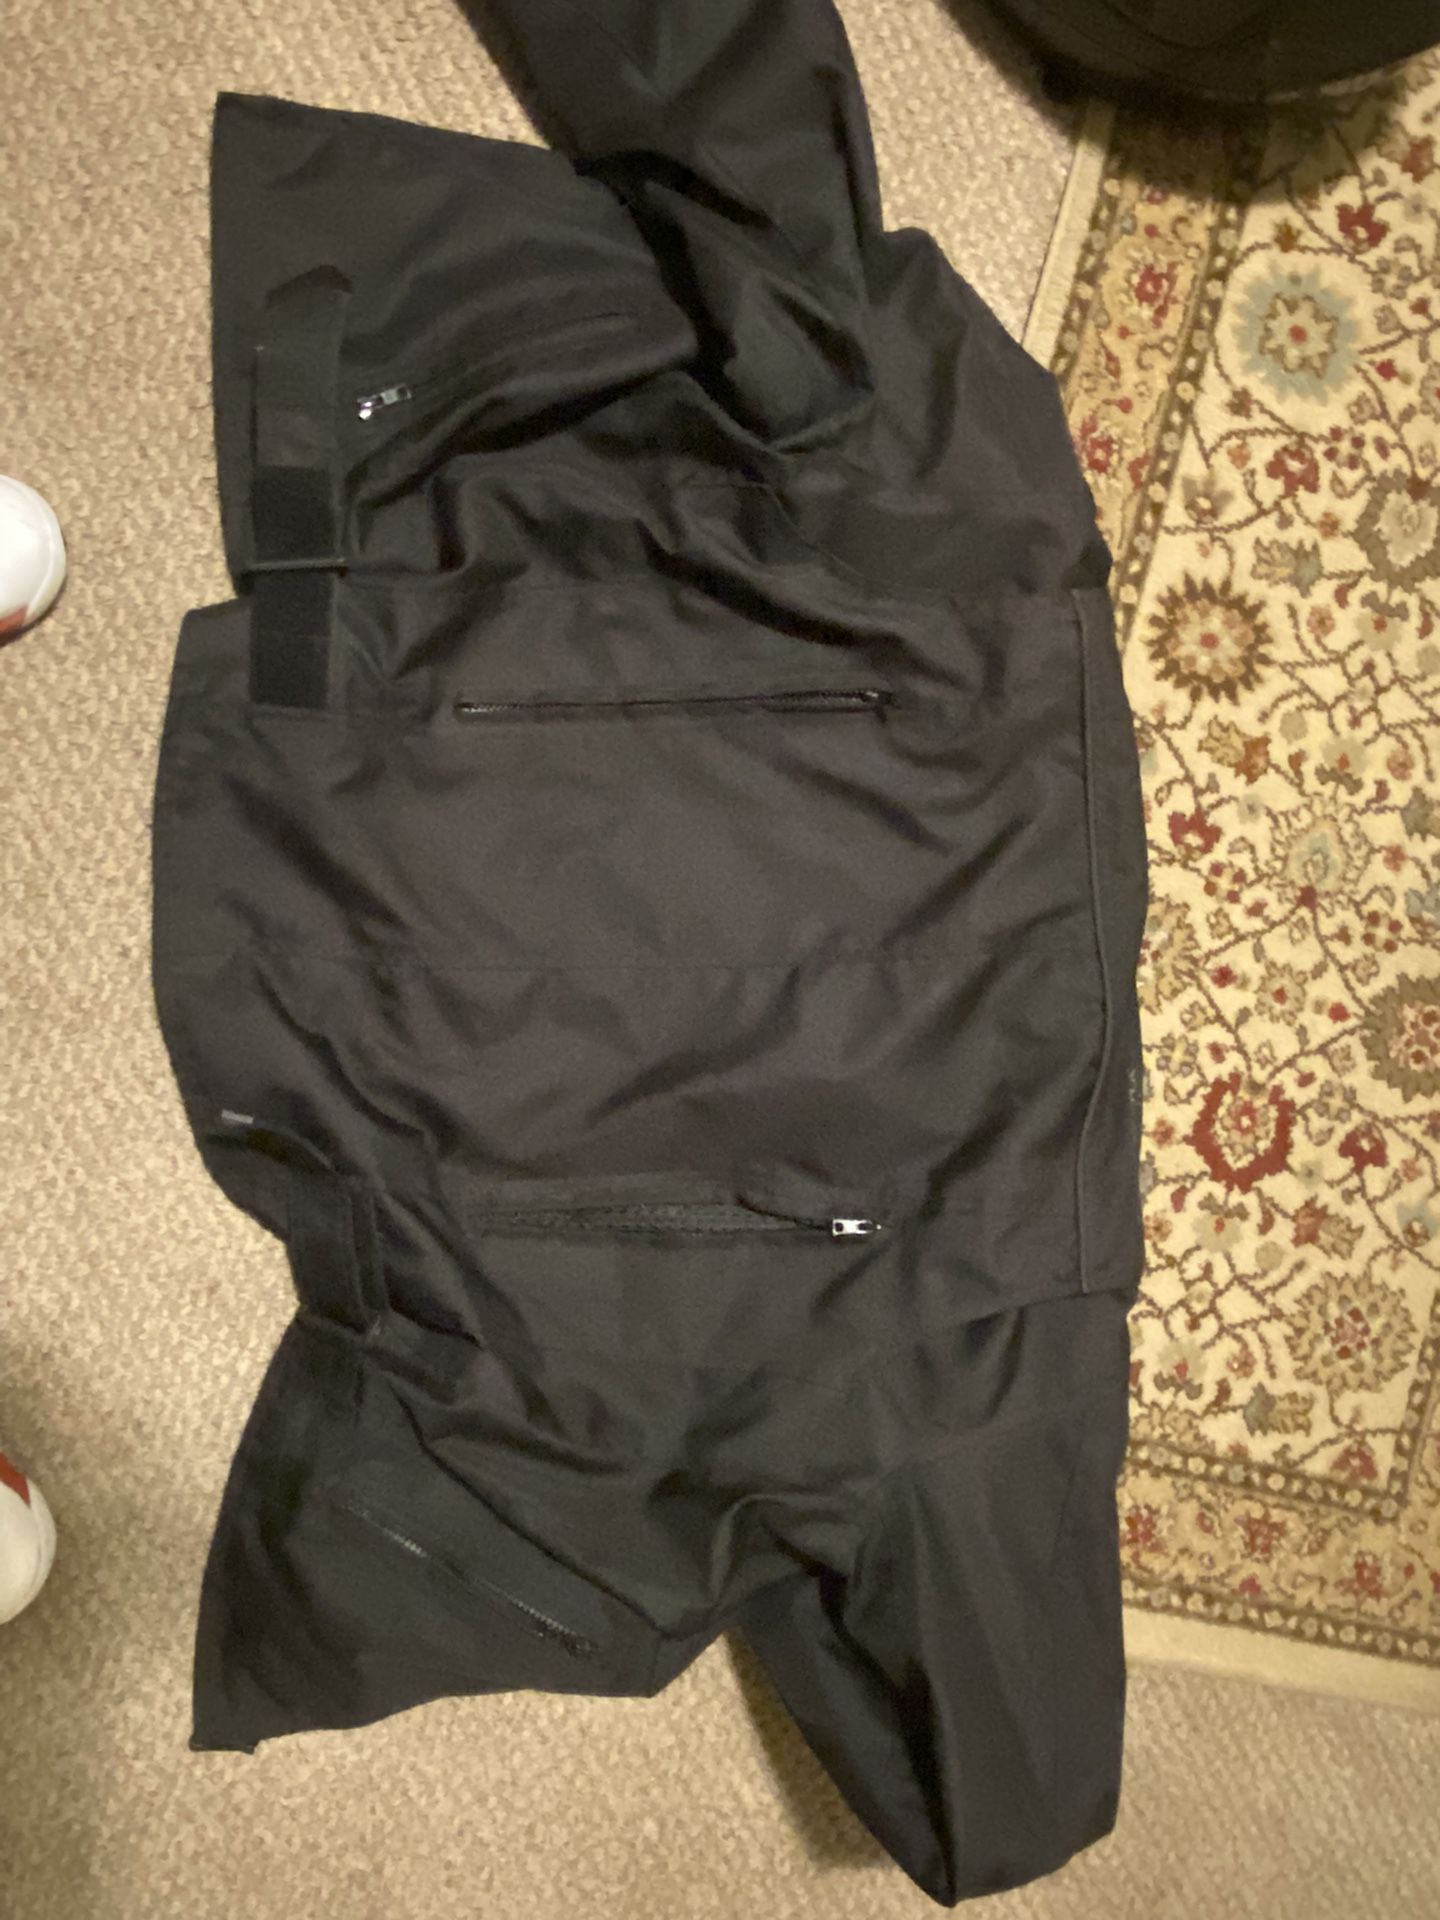 Street Bike Jacket Perfect Condition Never Used Still Has All The Pad’s  Nice Condition 